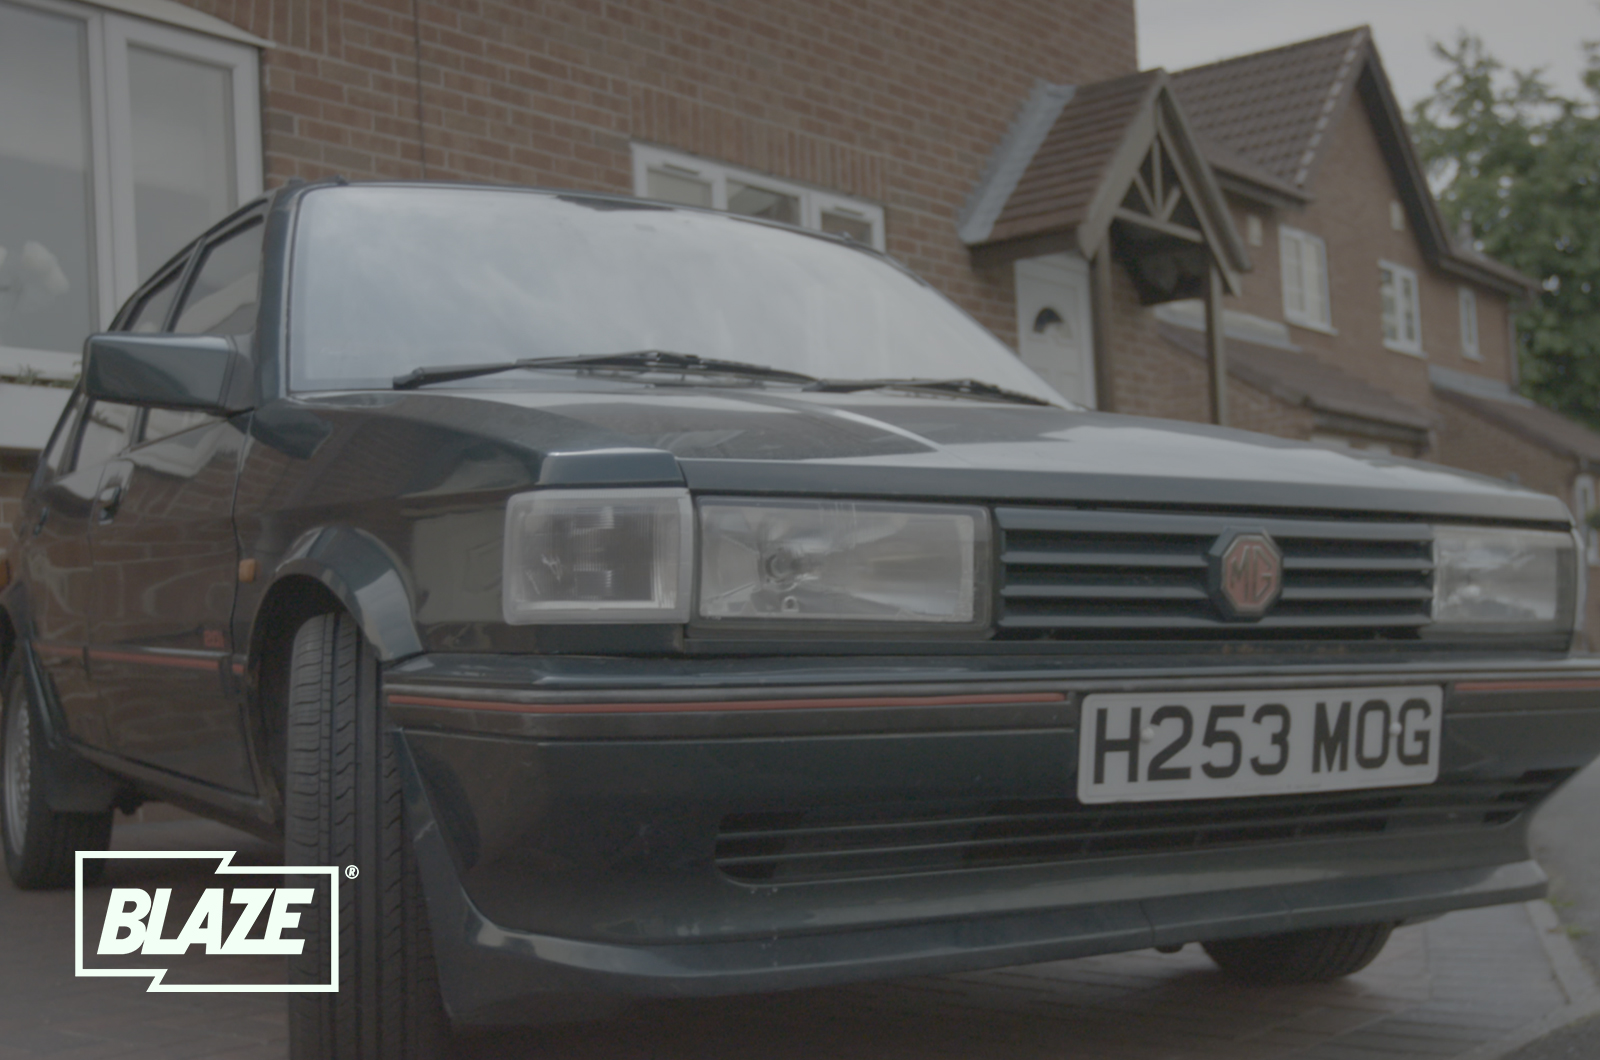 It may not be a true British sportscar, but Will and Gus admit they had fun restoring this Austin Maestro MG